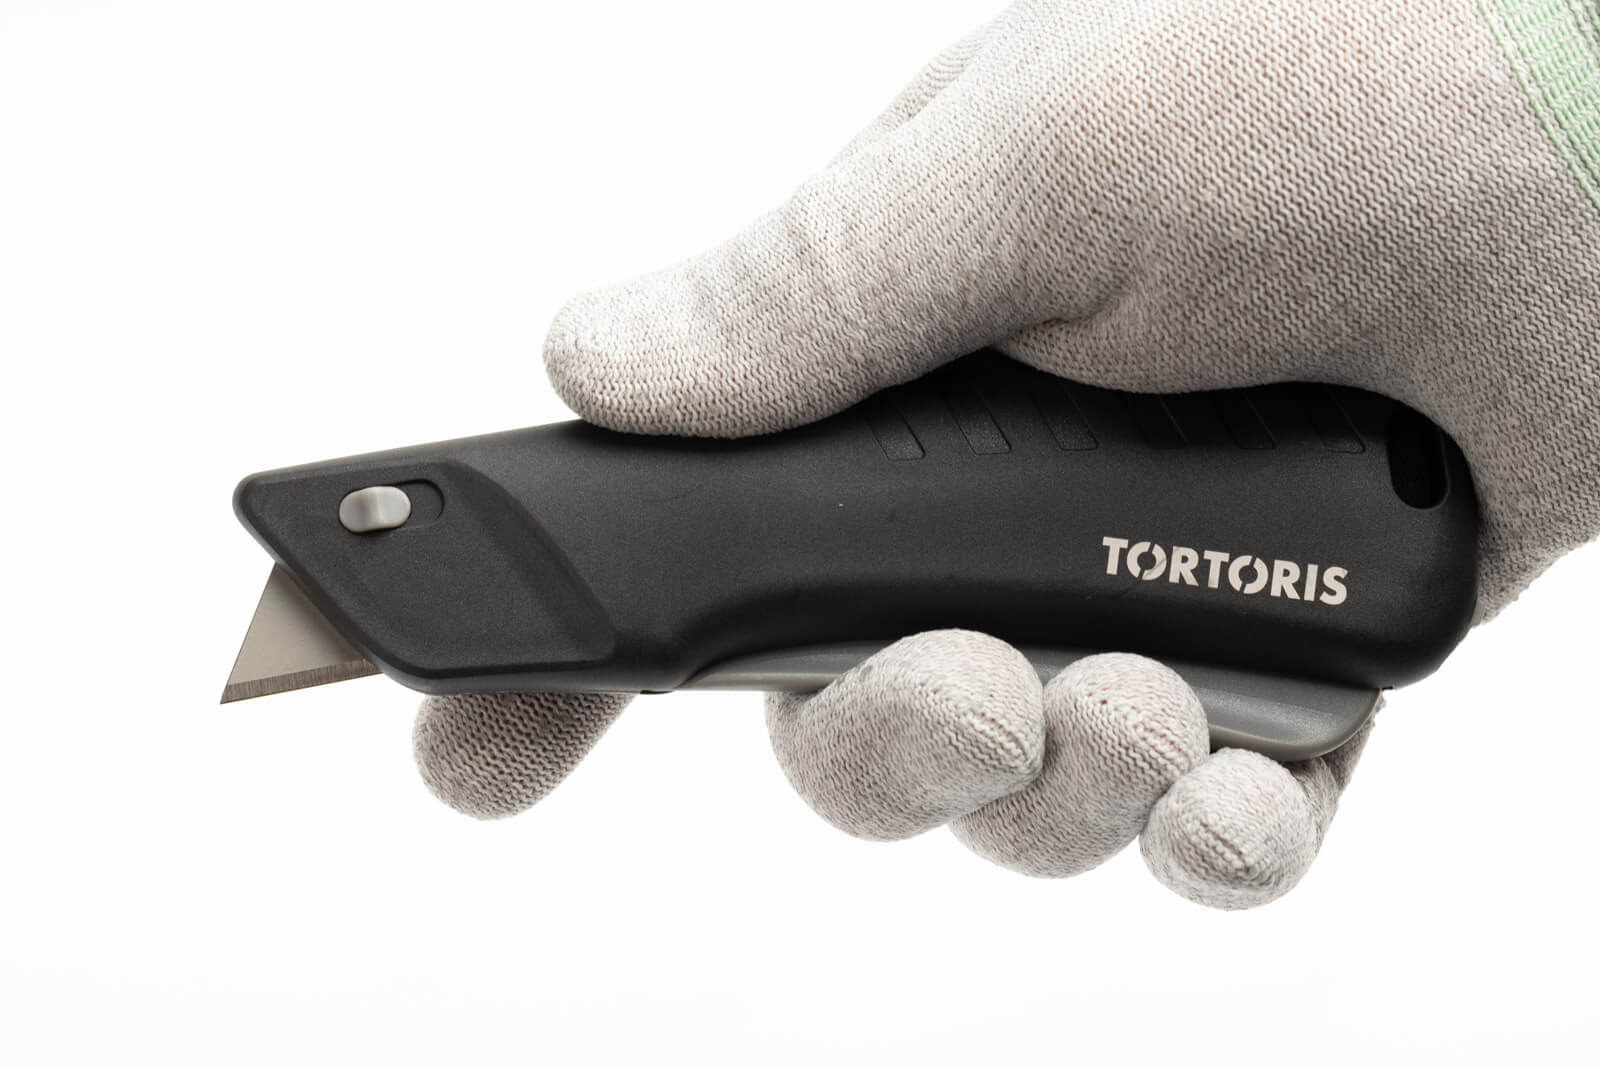 S24-saftey-cutter-automatic-blade-retraction-in-hand-TORTORIS_1600